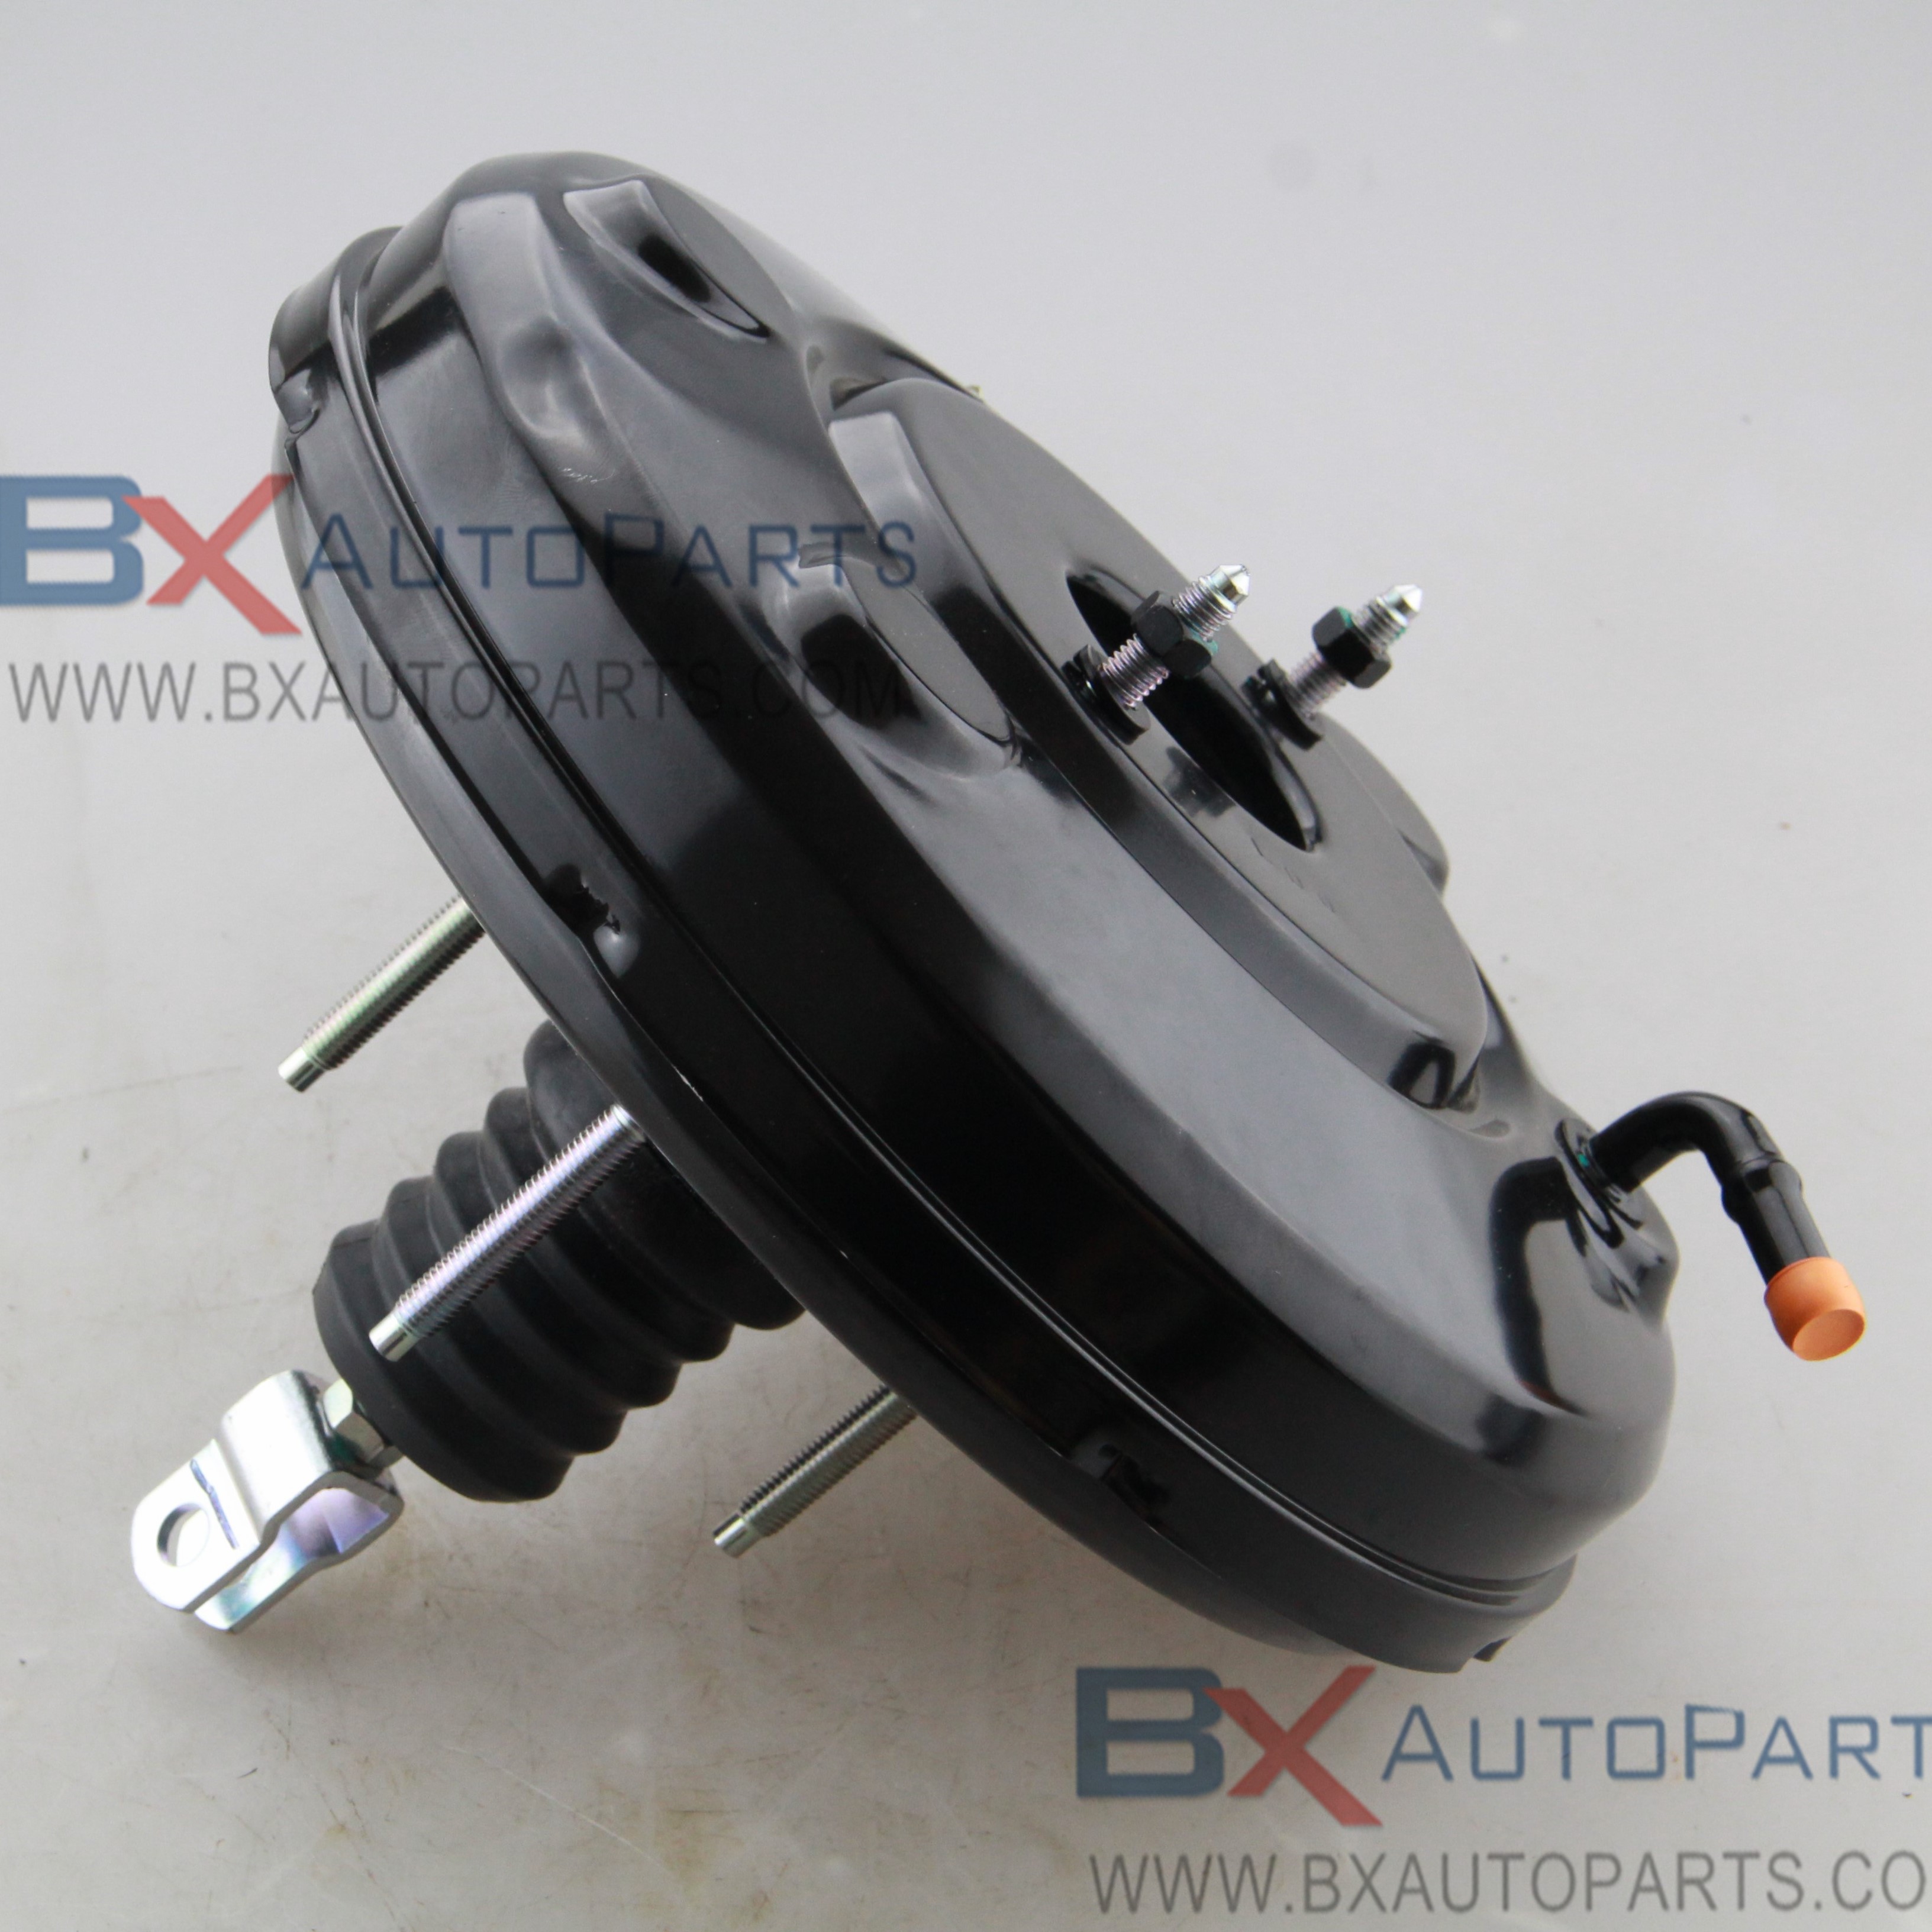 BRAKE BOOSTER FOR TOYOTA TUNDRA 2000-2006 XK30/XK40 LHD 44610-0C010